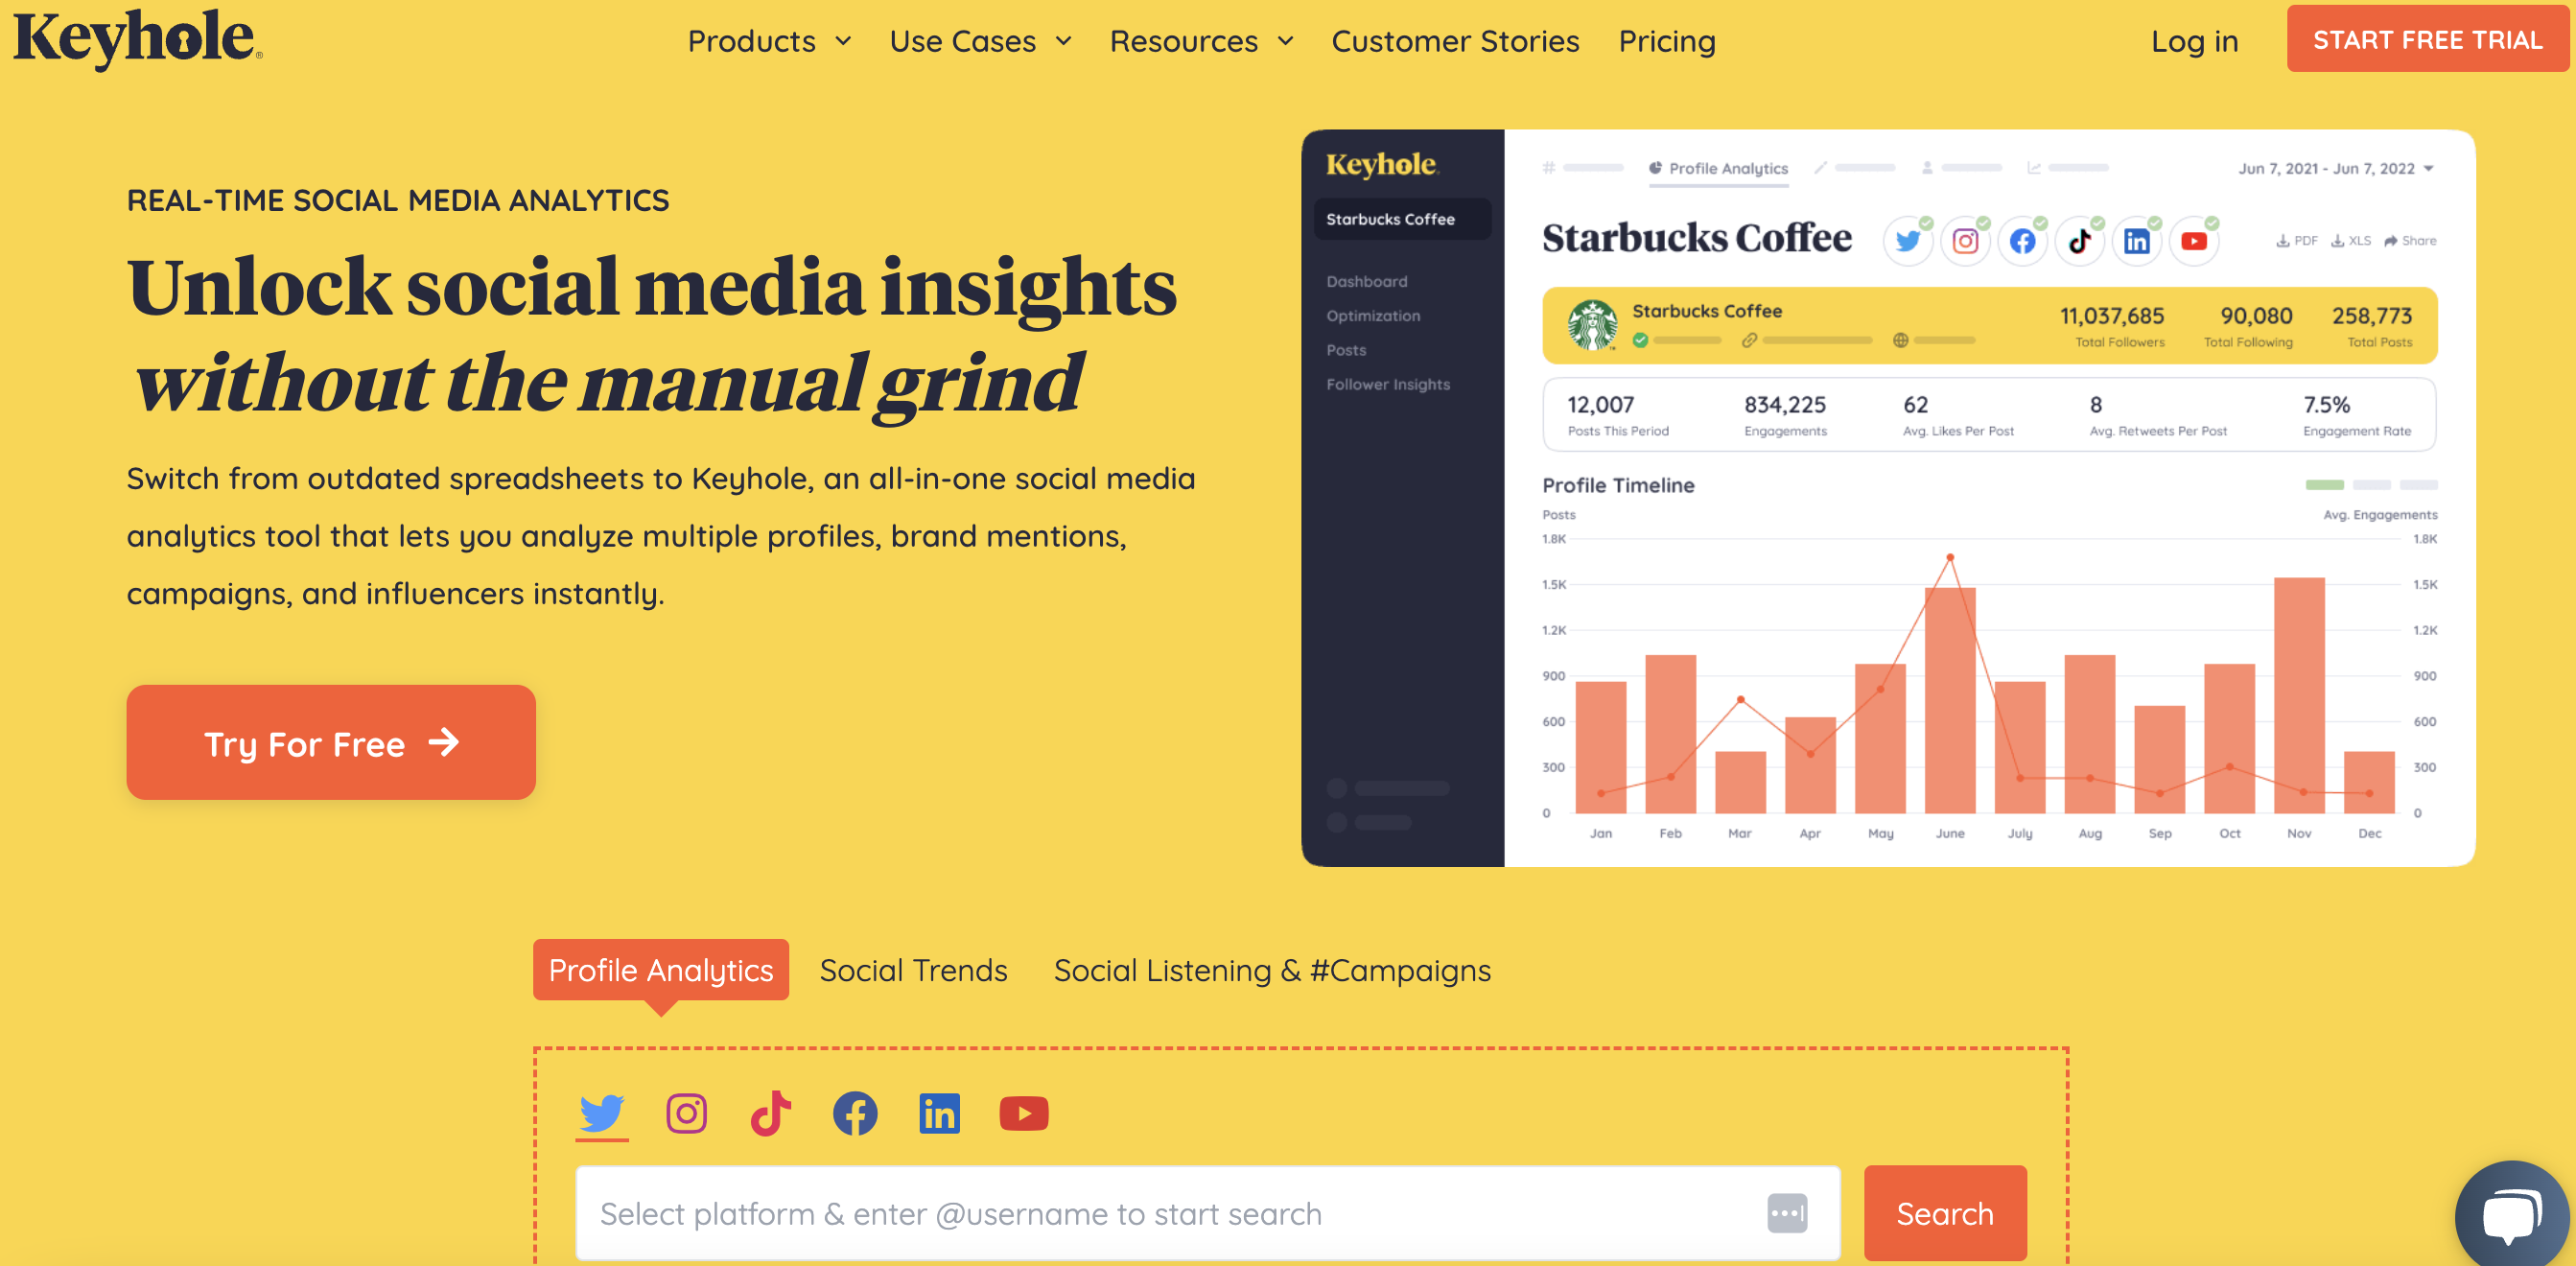 keyhole homepage with a sample analysis of Starbucks Coffee social profiles and text that reads "unlock social media insights without the manual grind"